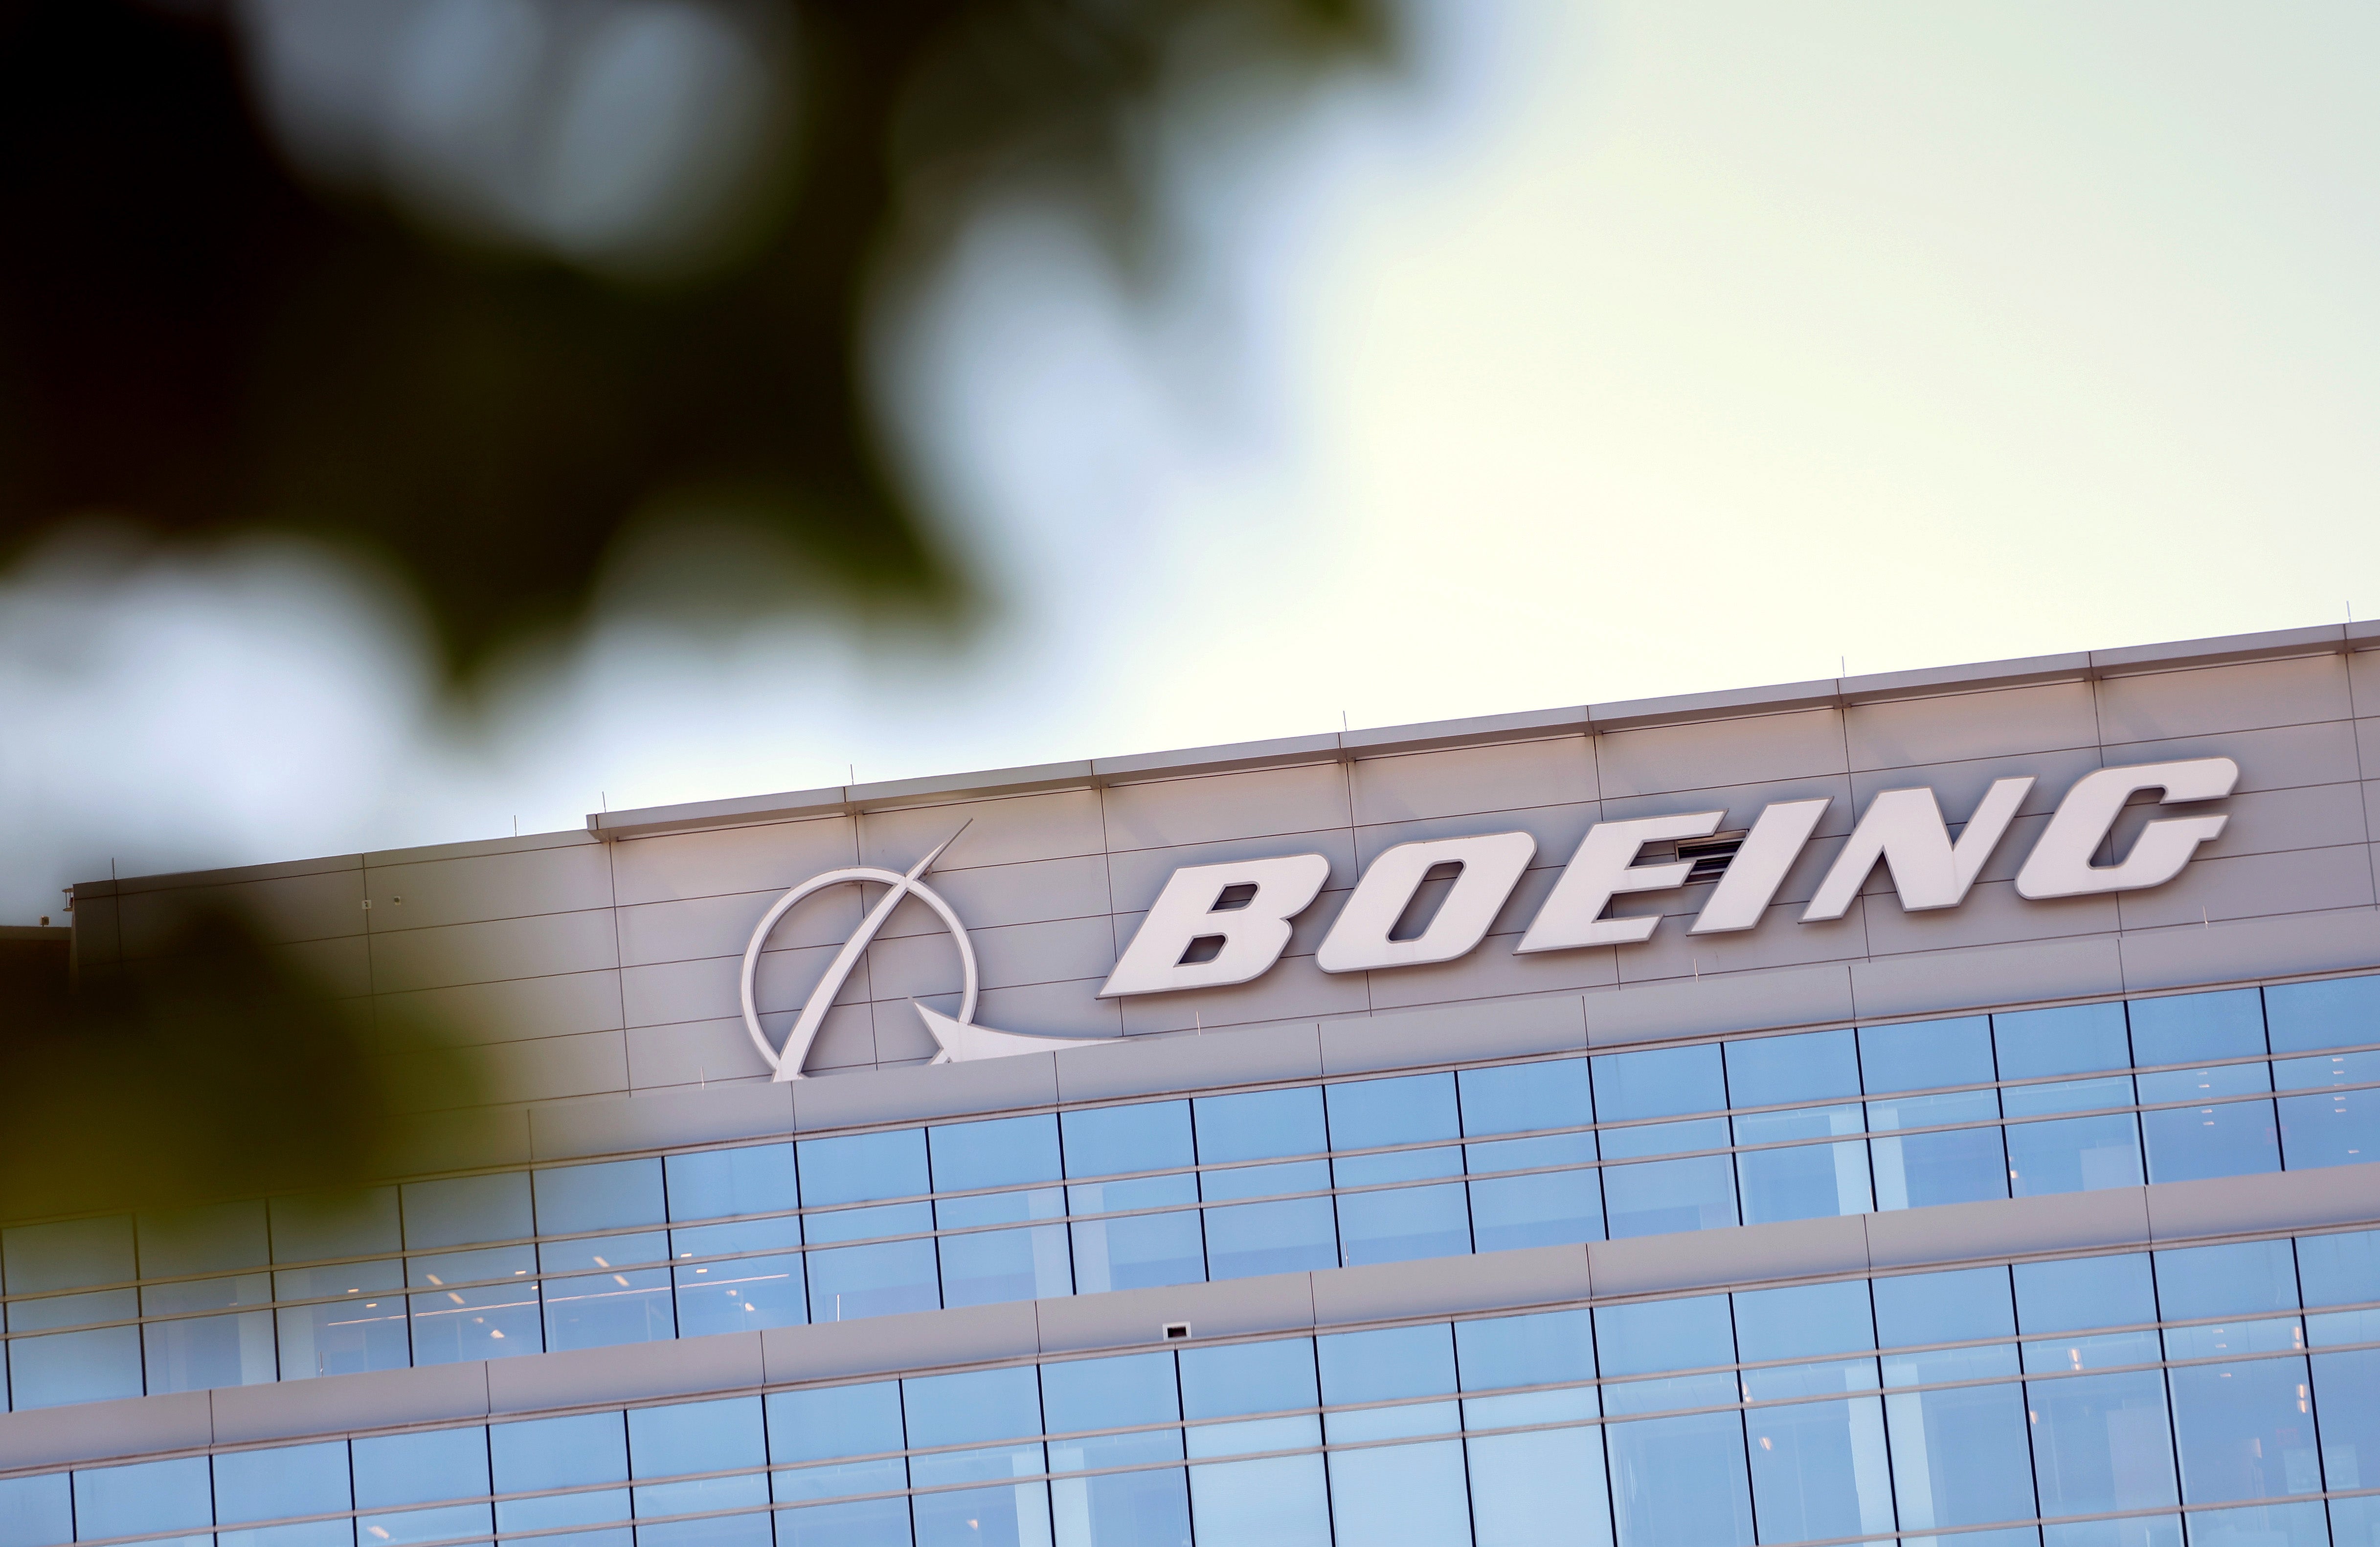 Recent events have led to big changes in the top roles at Boeing